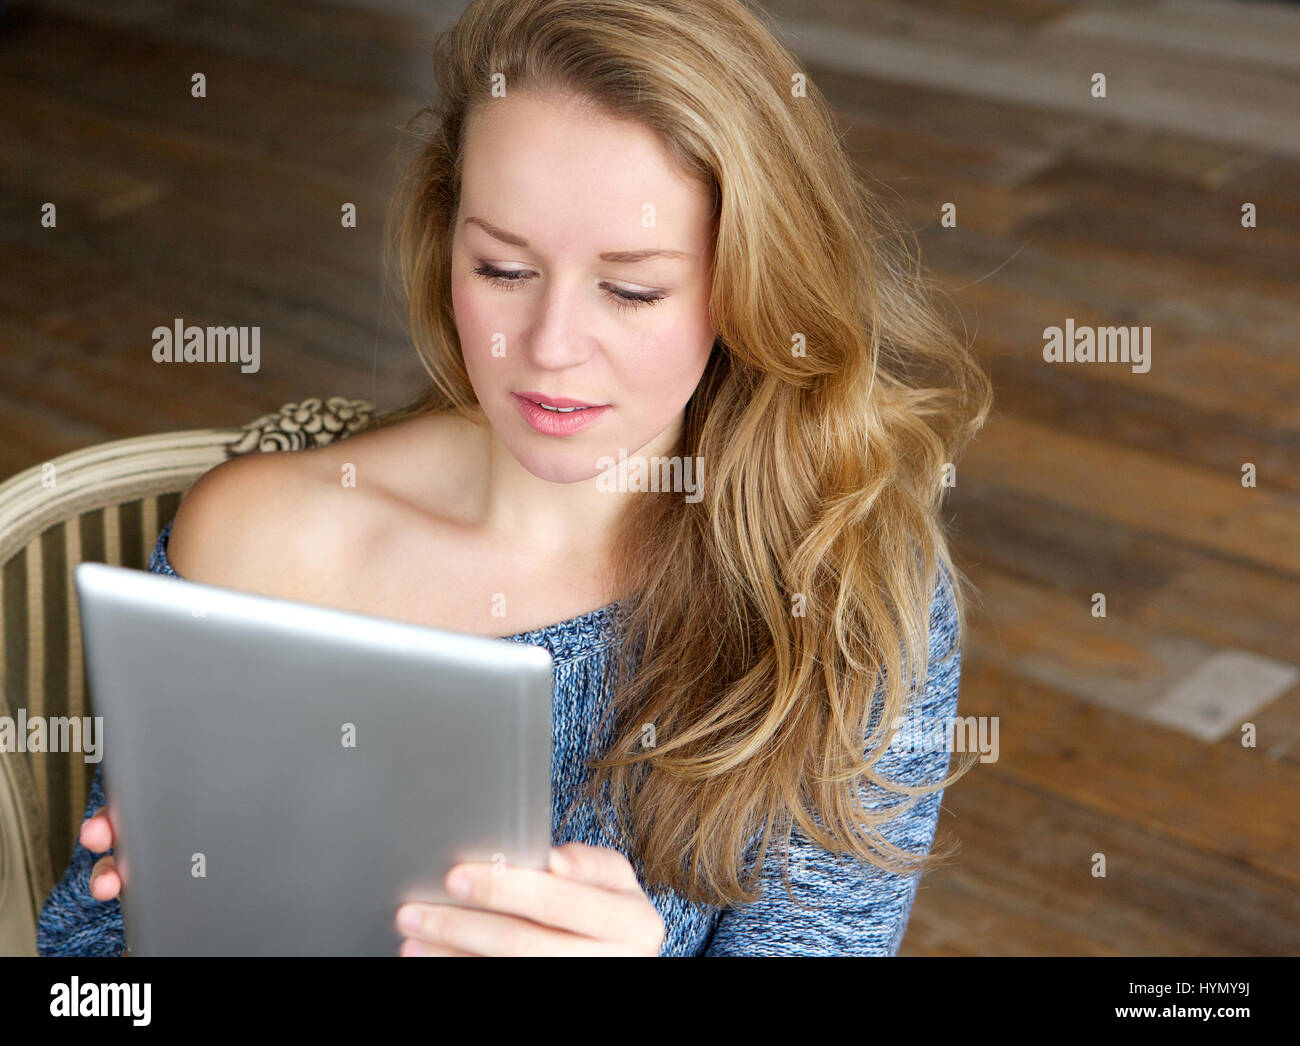 Portrait of a young woman learning how to use touchscreen tablet Stock Photo